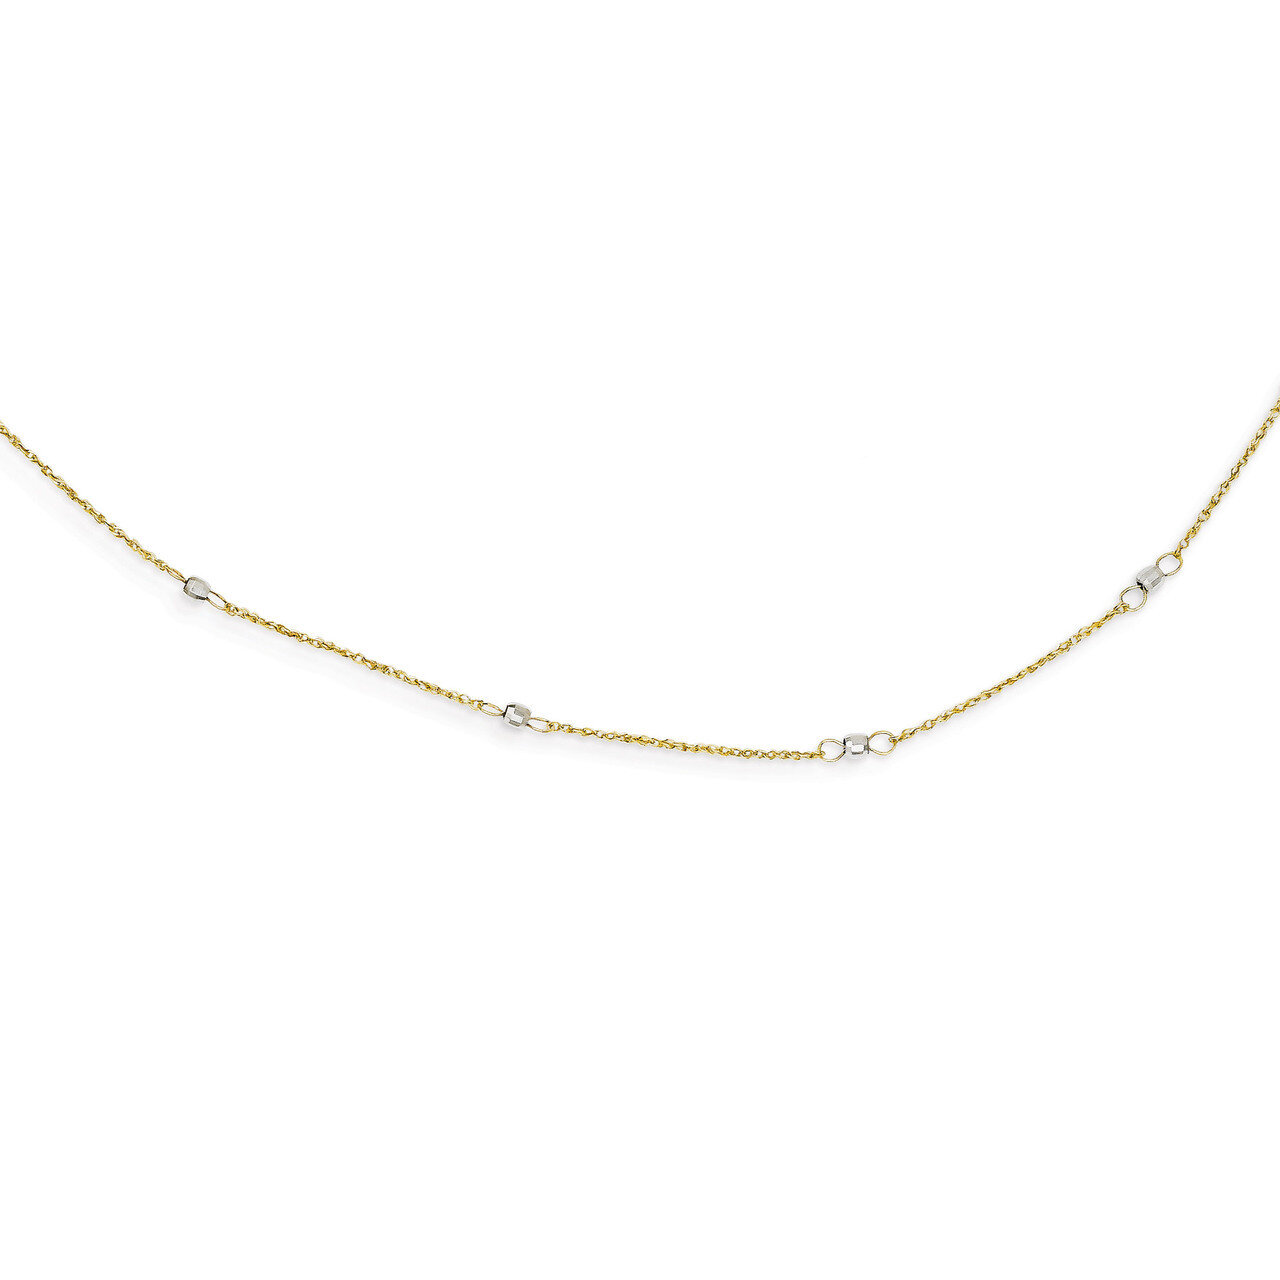 Ropa Mirror Bead with 2in Ext Necklace 16 Inch 14k Two-Tone Gold SF2002-16